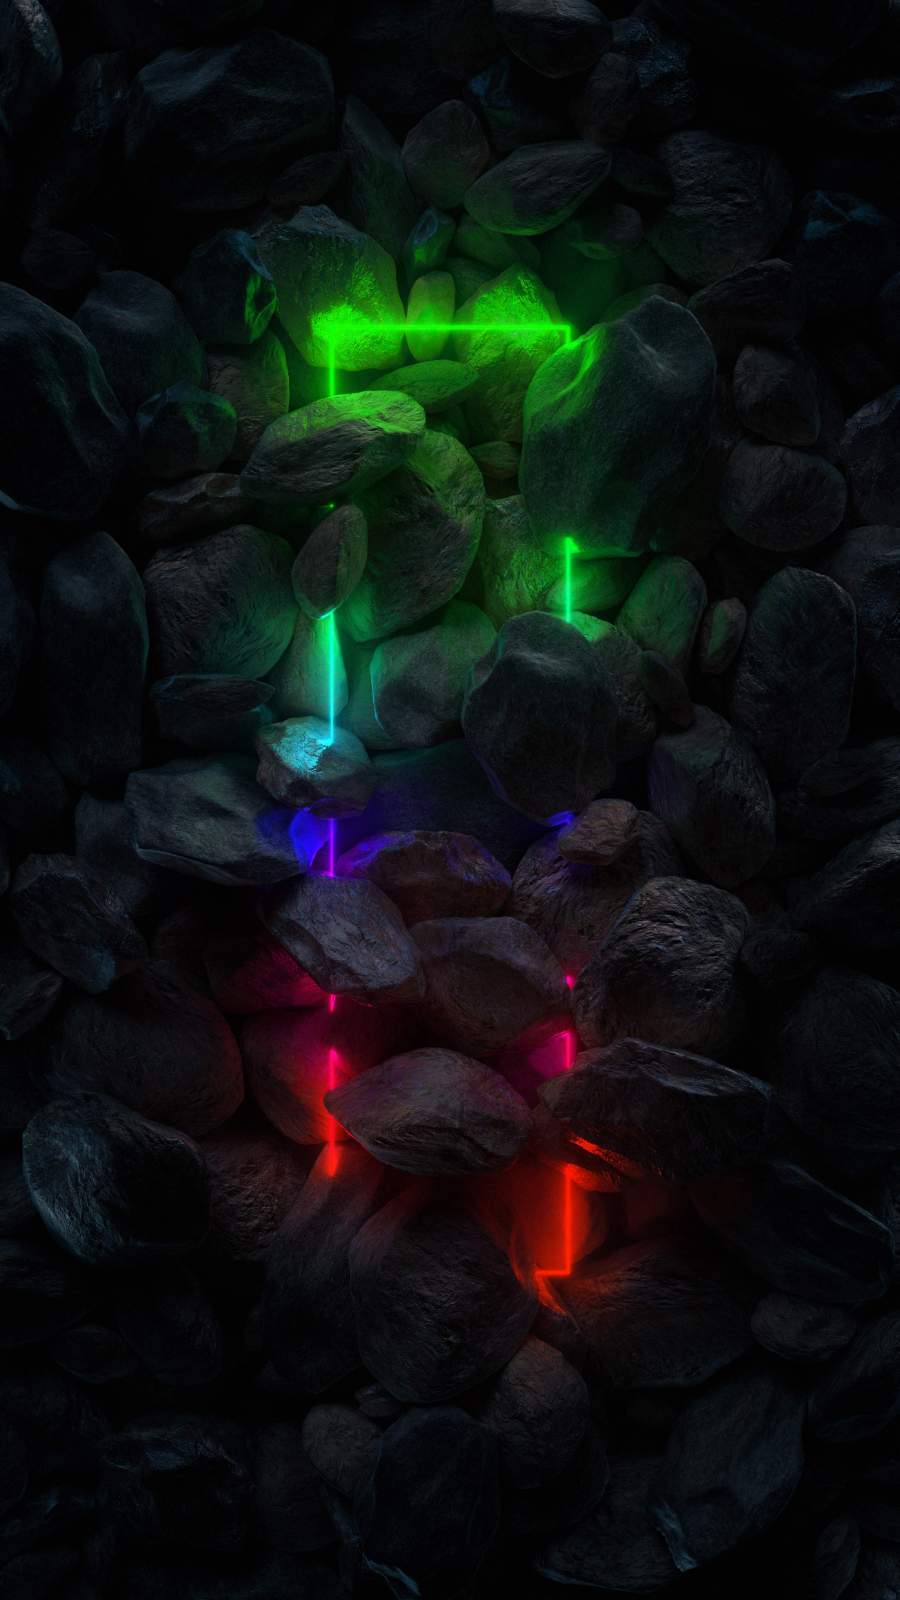 Stone Neon Light - IPhone Wallpapers : iPhone Wallpapers